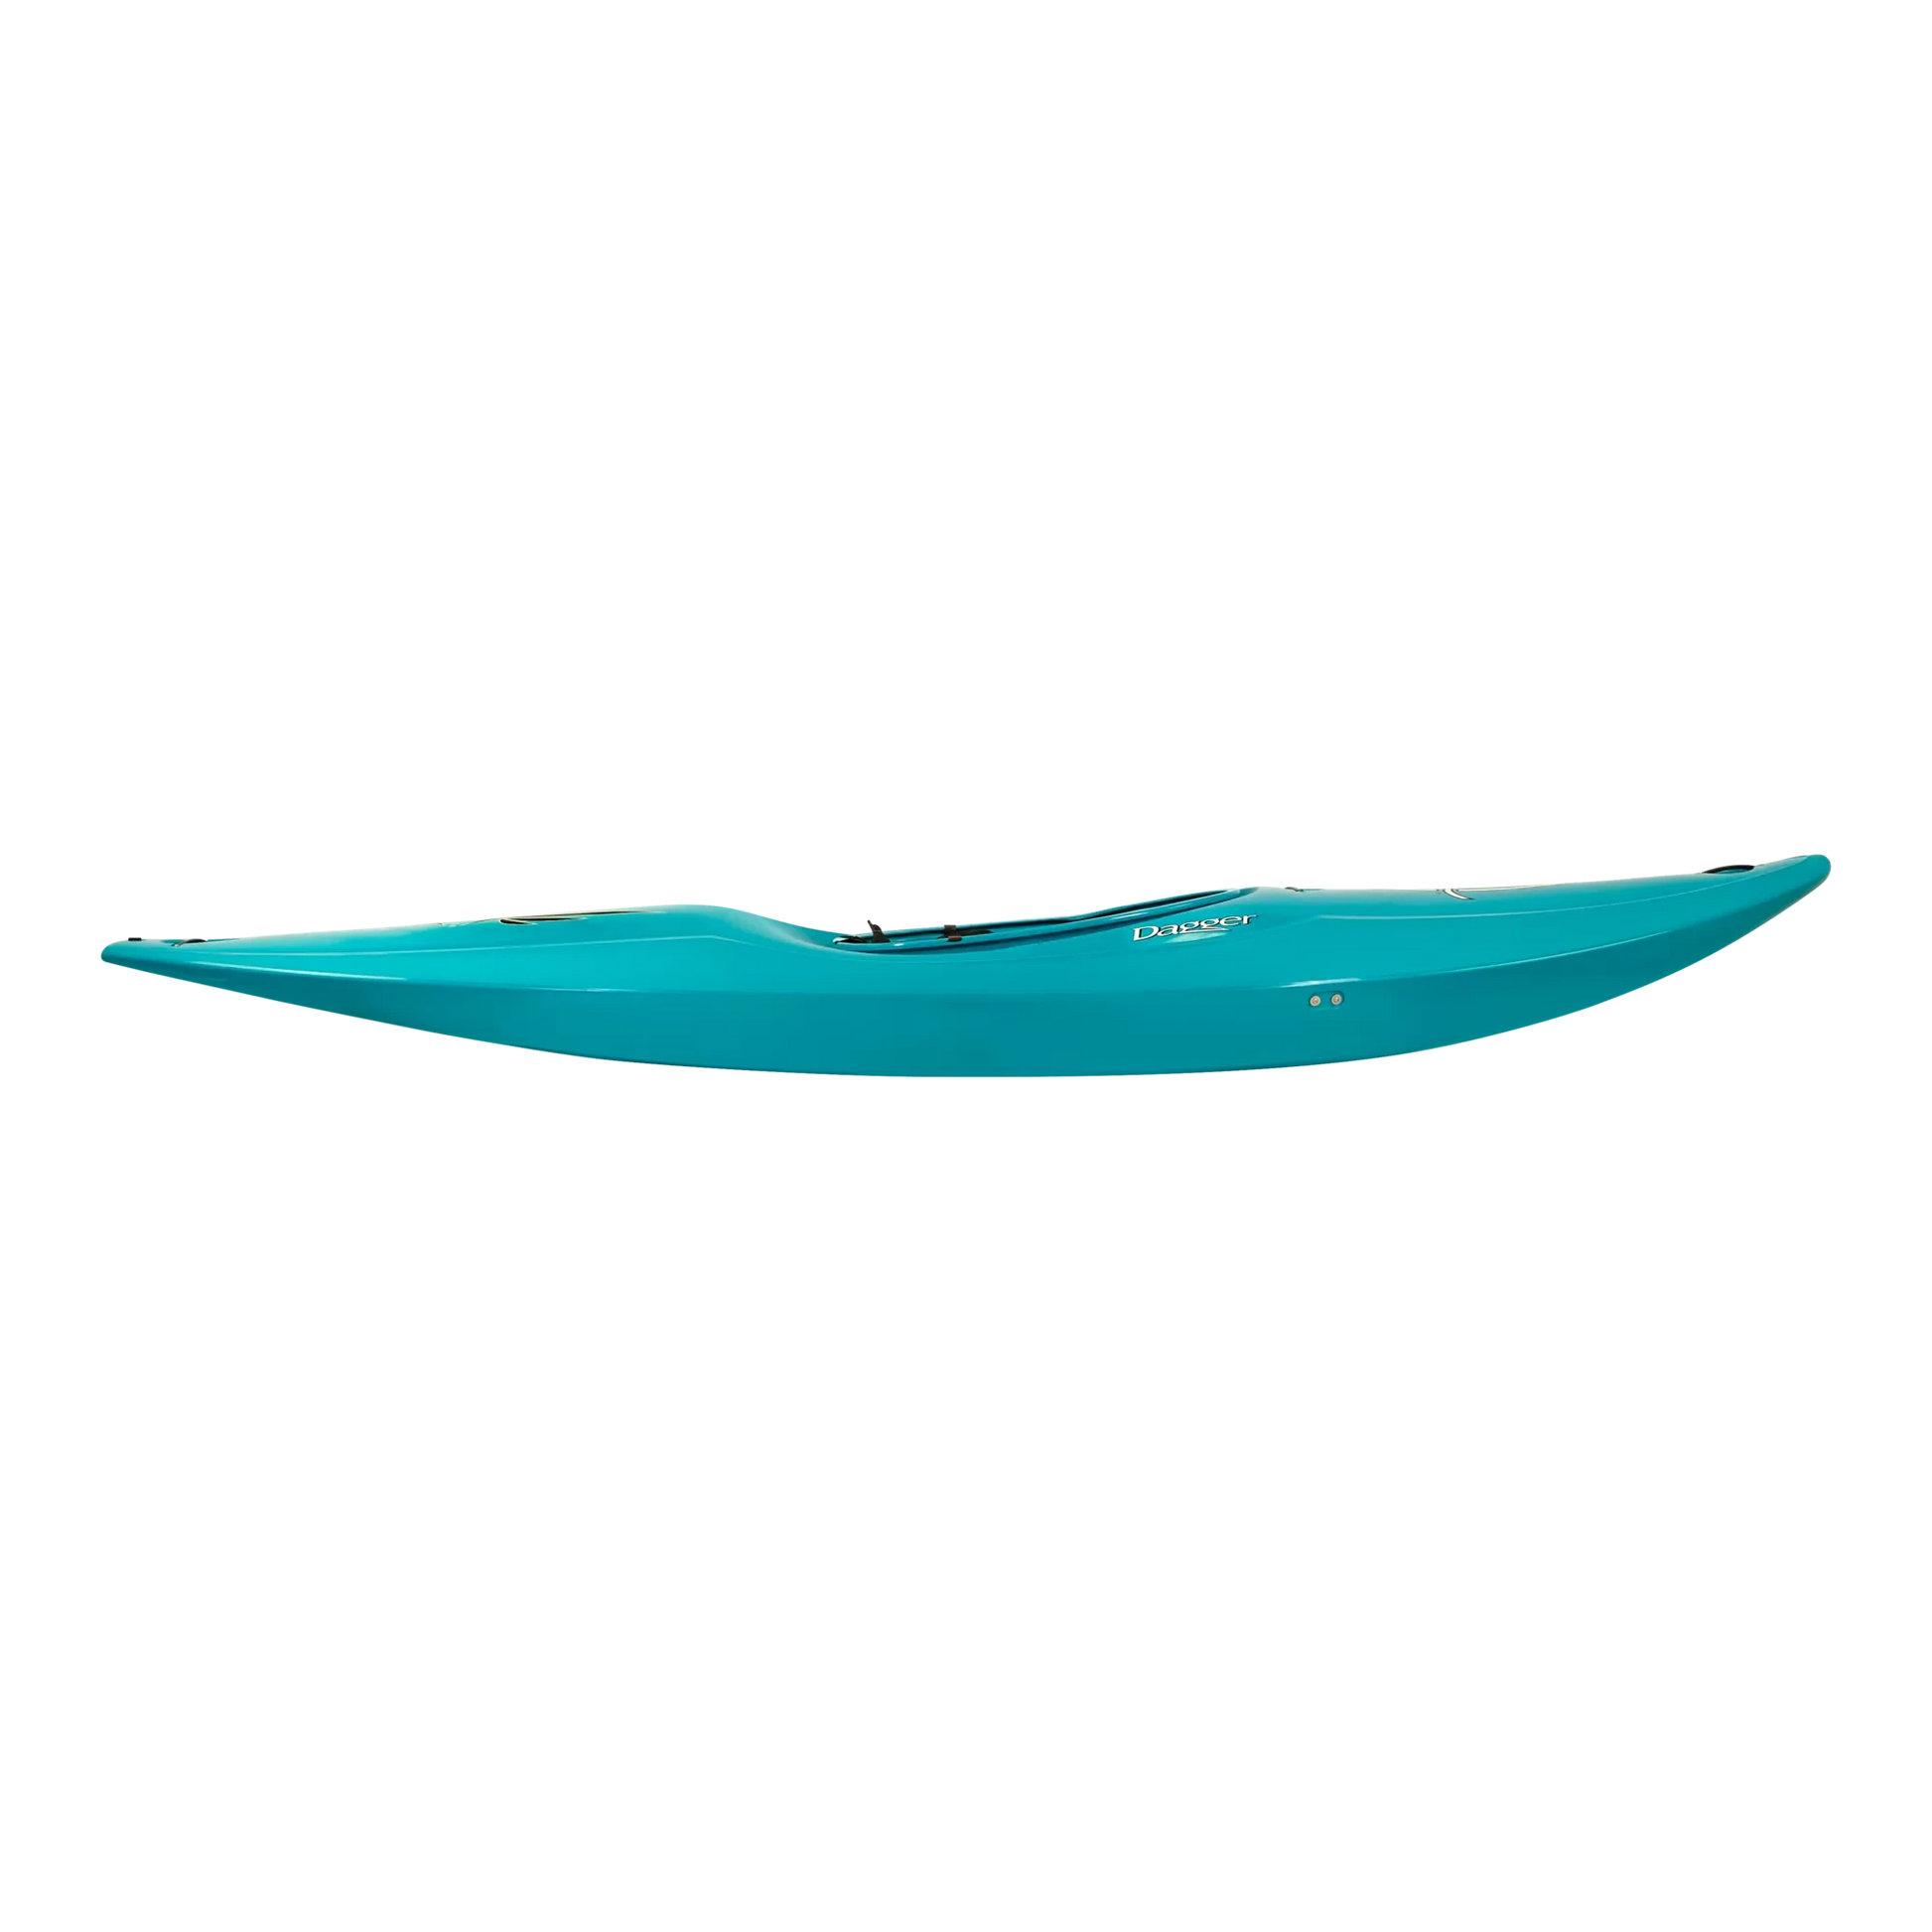 Side view of a turquoise Dagger Vanguard 12 racing kayak with a black background.